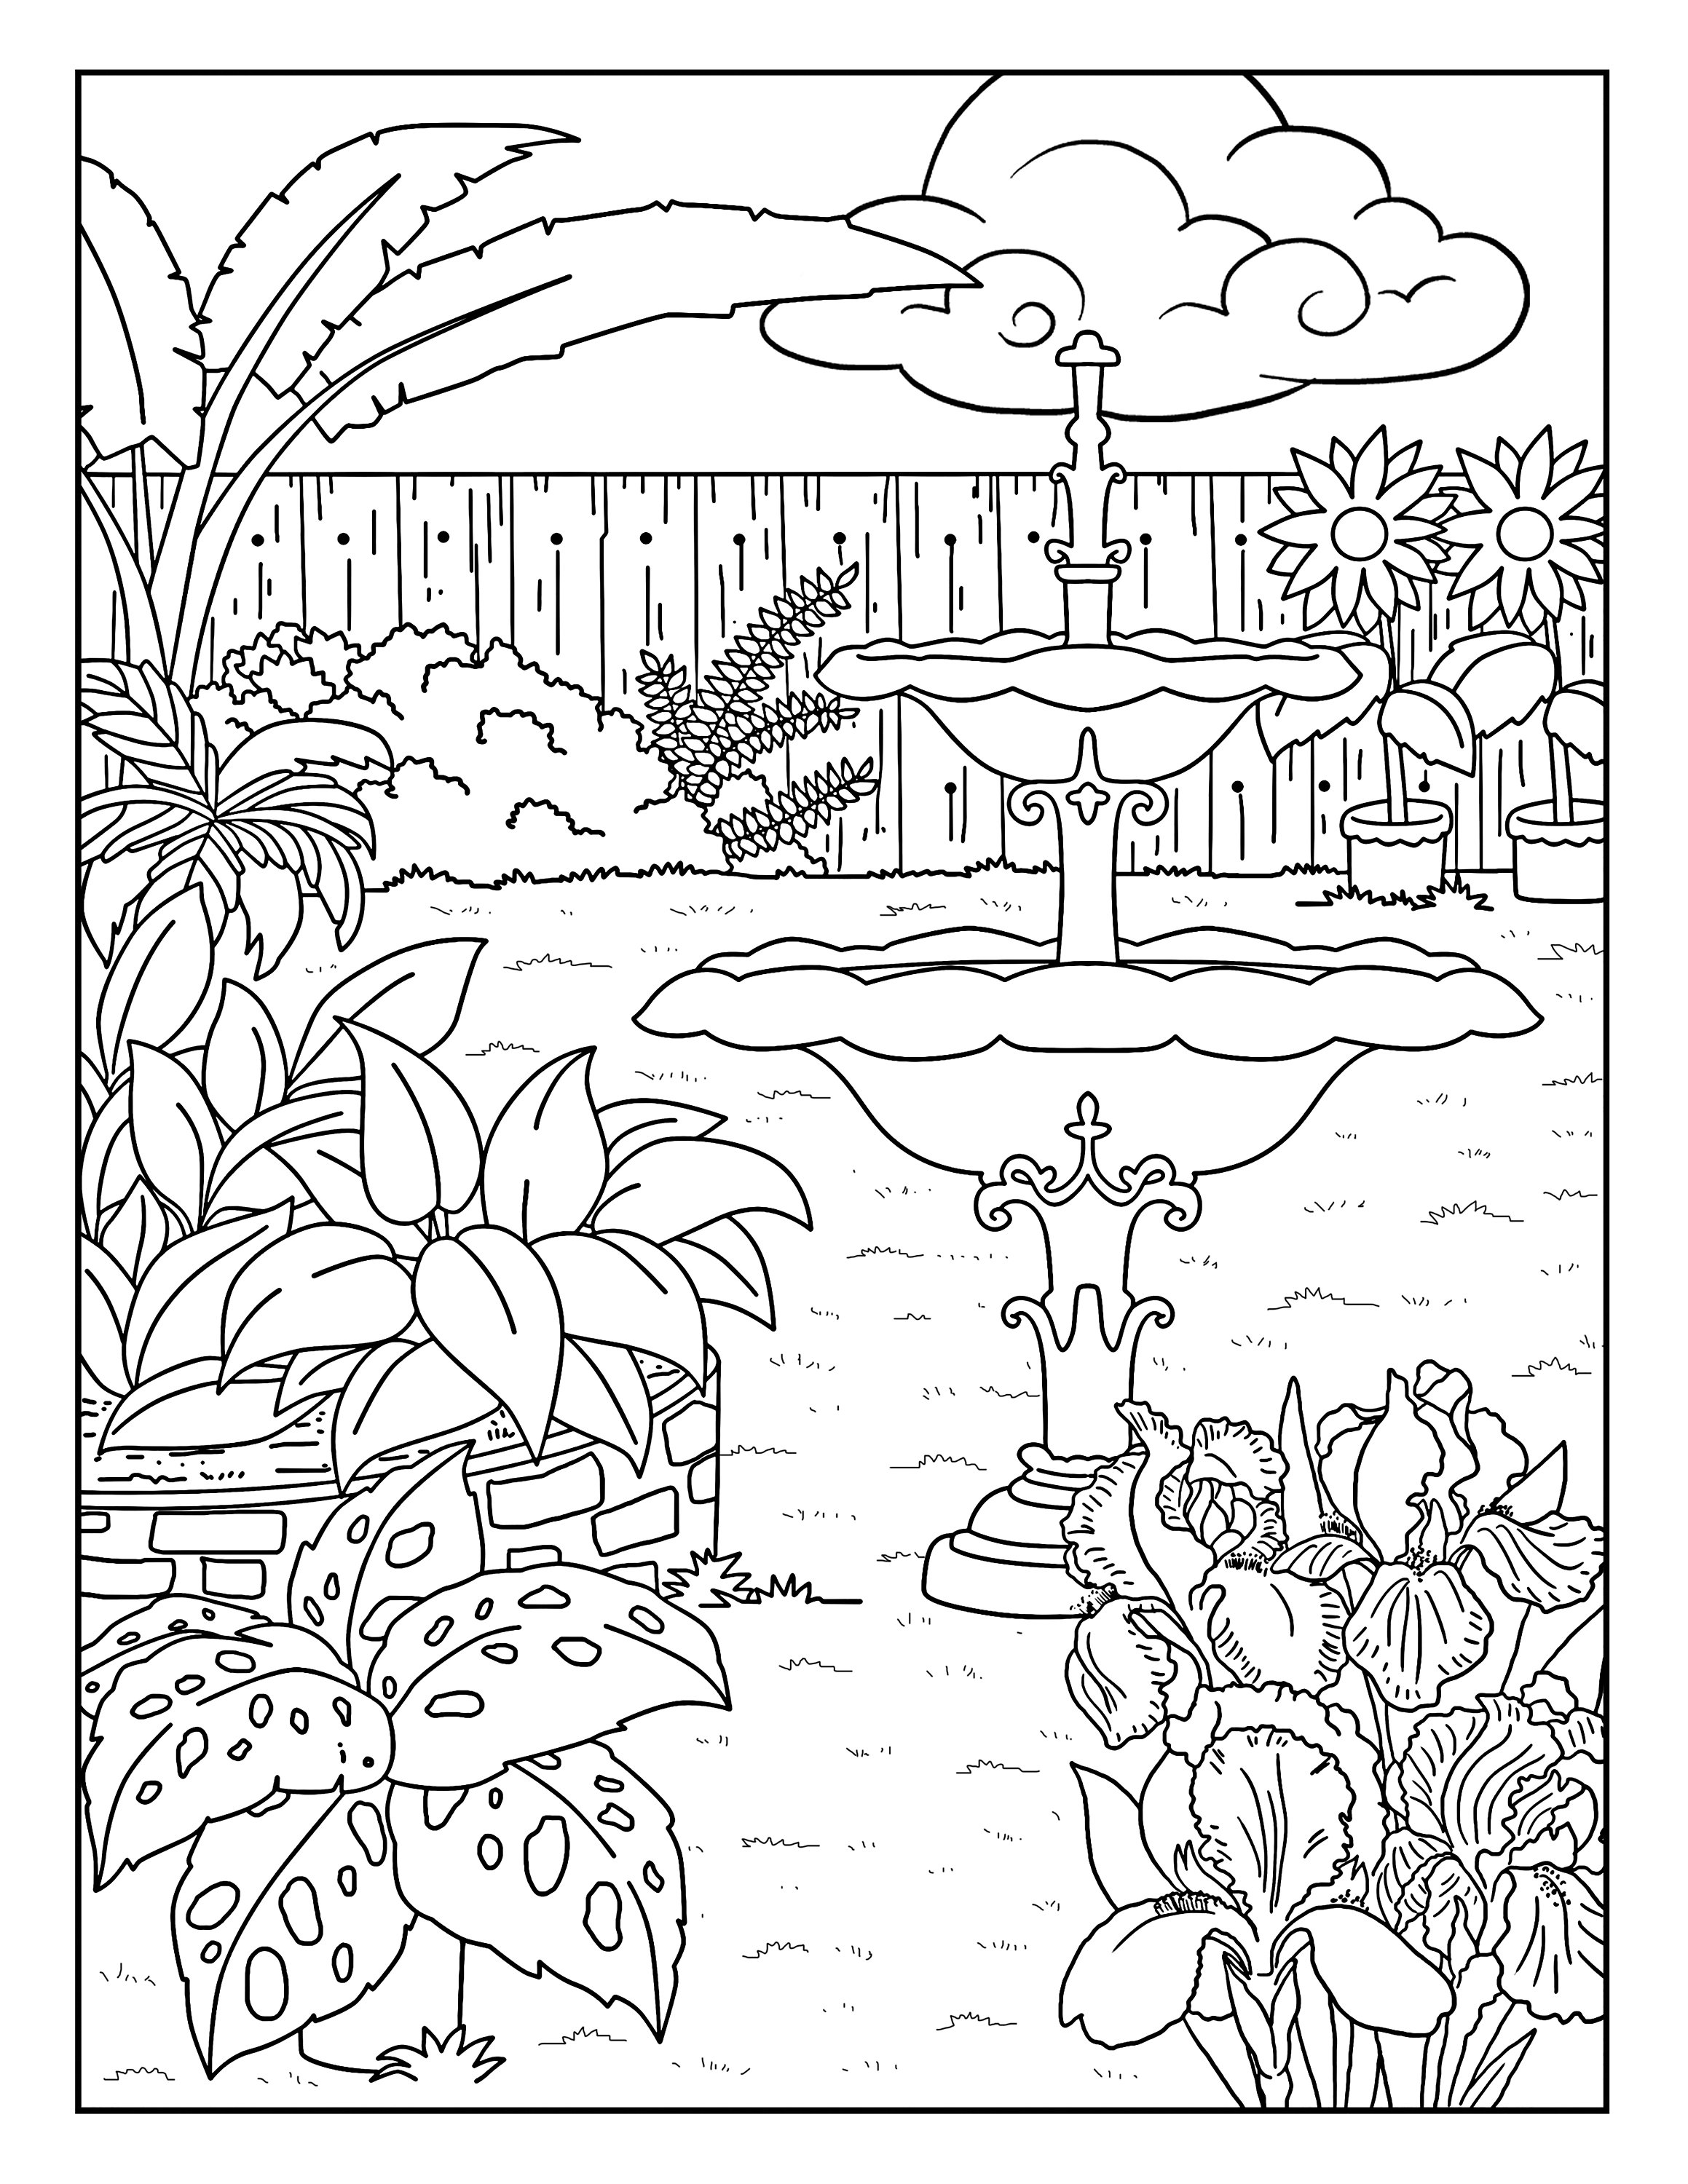 Fountain garden gallery coloring pages for adults printable coloring page instant download pdf